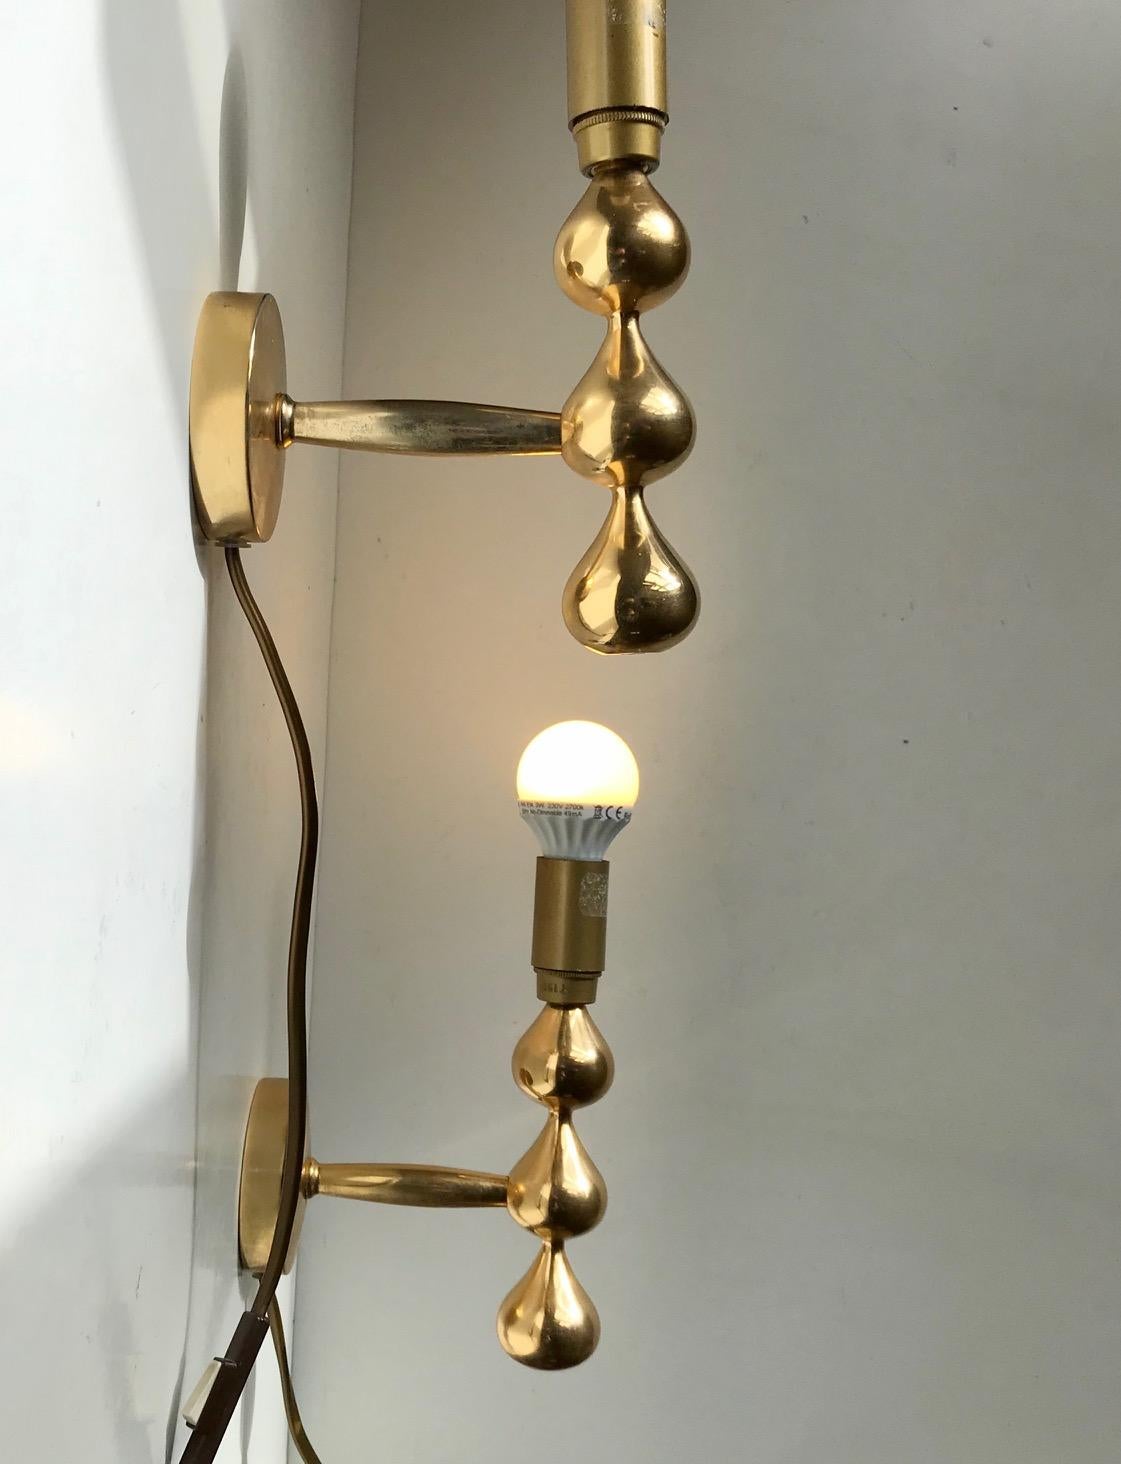 Sculptural tear drop shaped set of 24-carat gold plated Wall lights designed by Hugo Asmussen for Asmussen in Denmark, circa 1960-70. Very heavy made stock in a superb quality. Use them as depicted with a decorative dim bulb or personalize with a